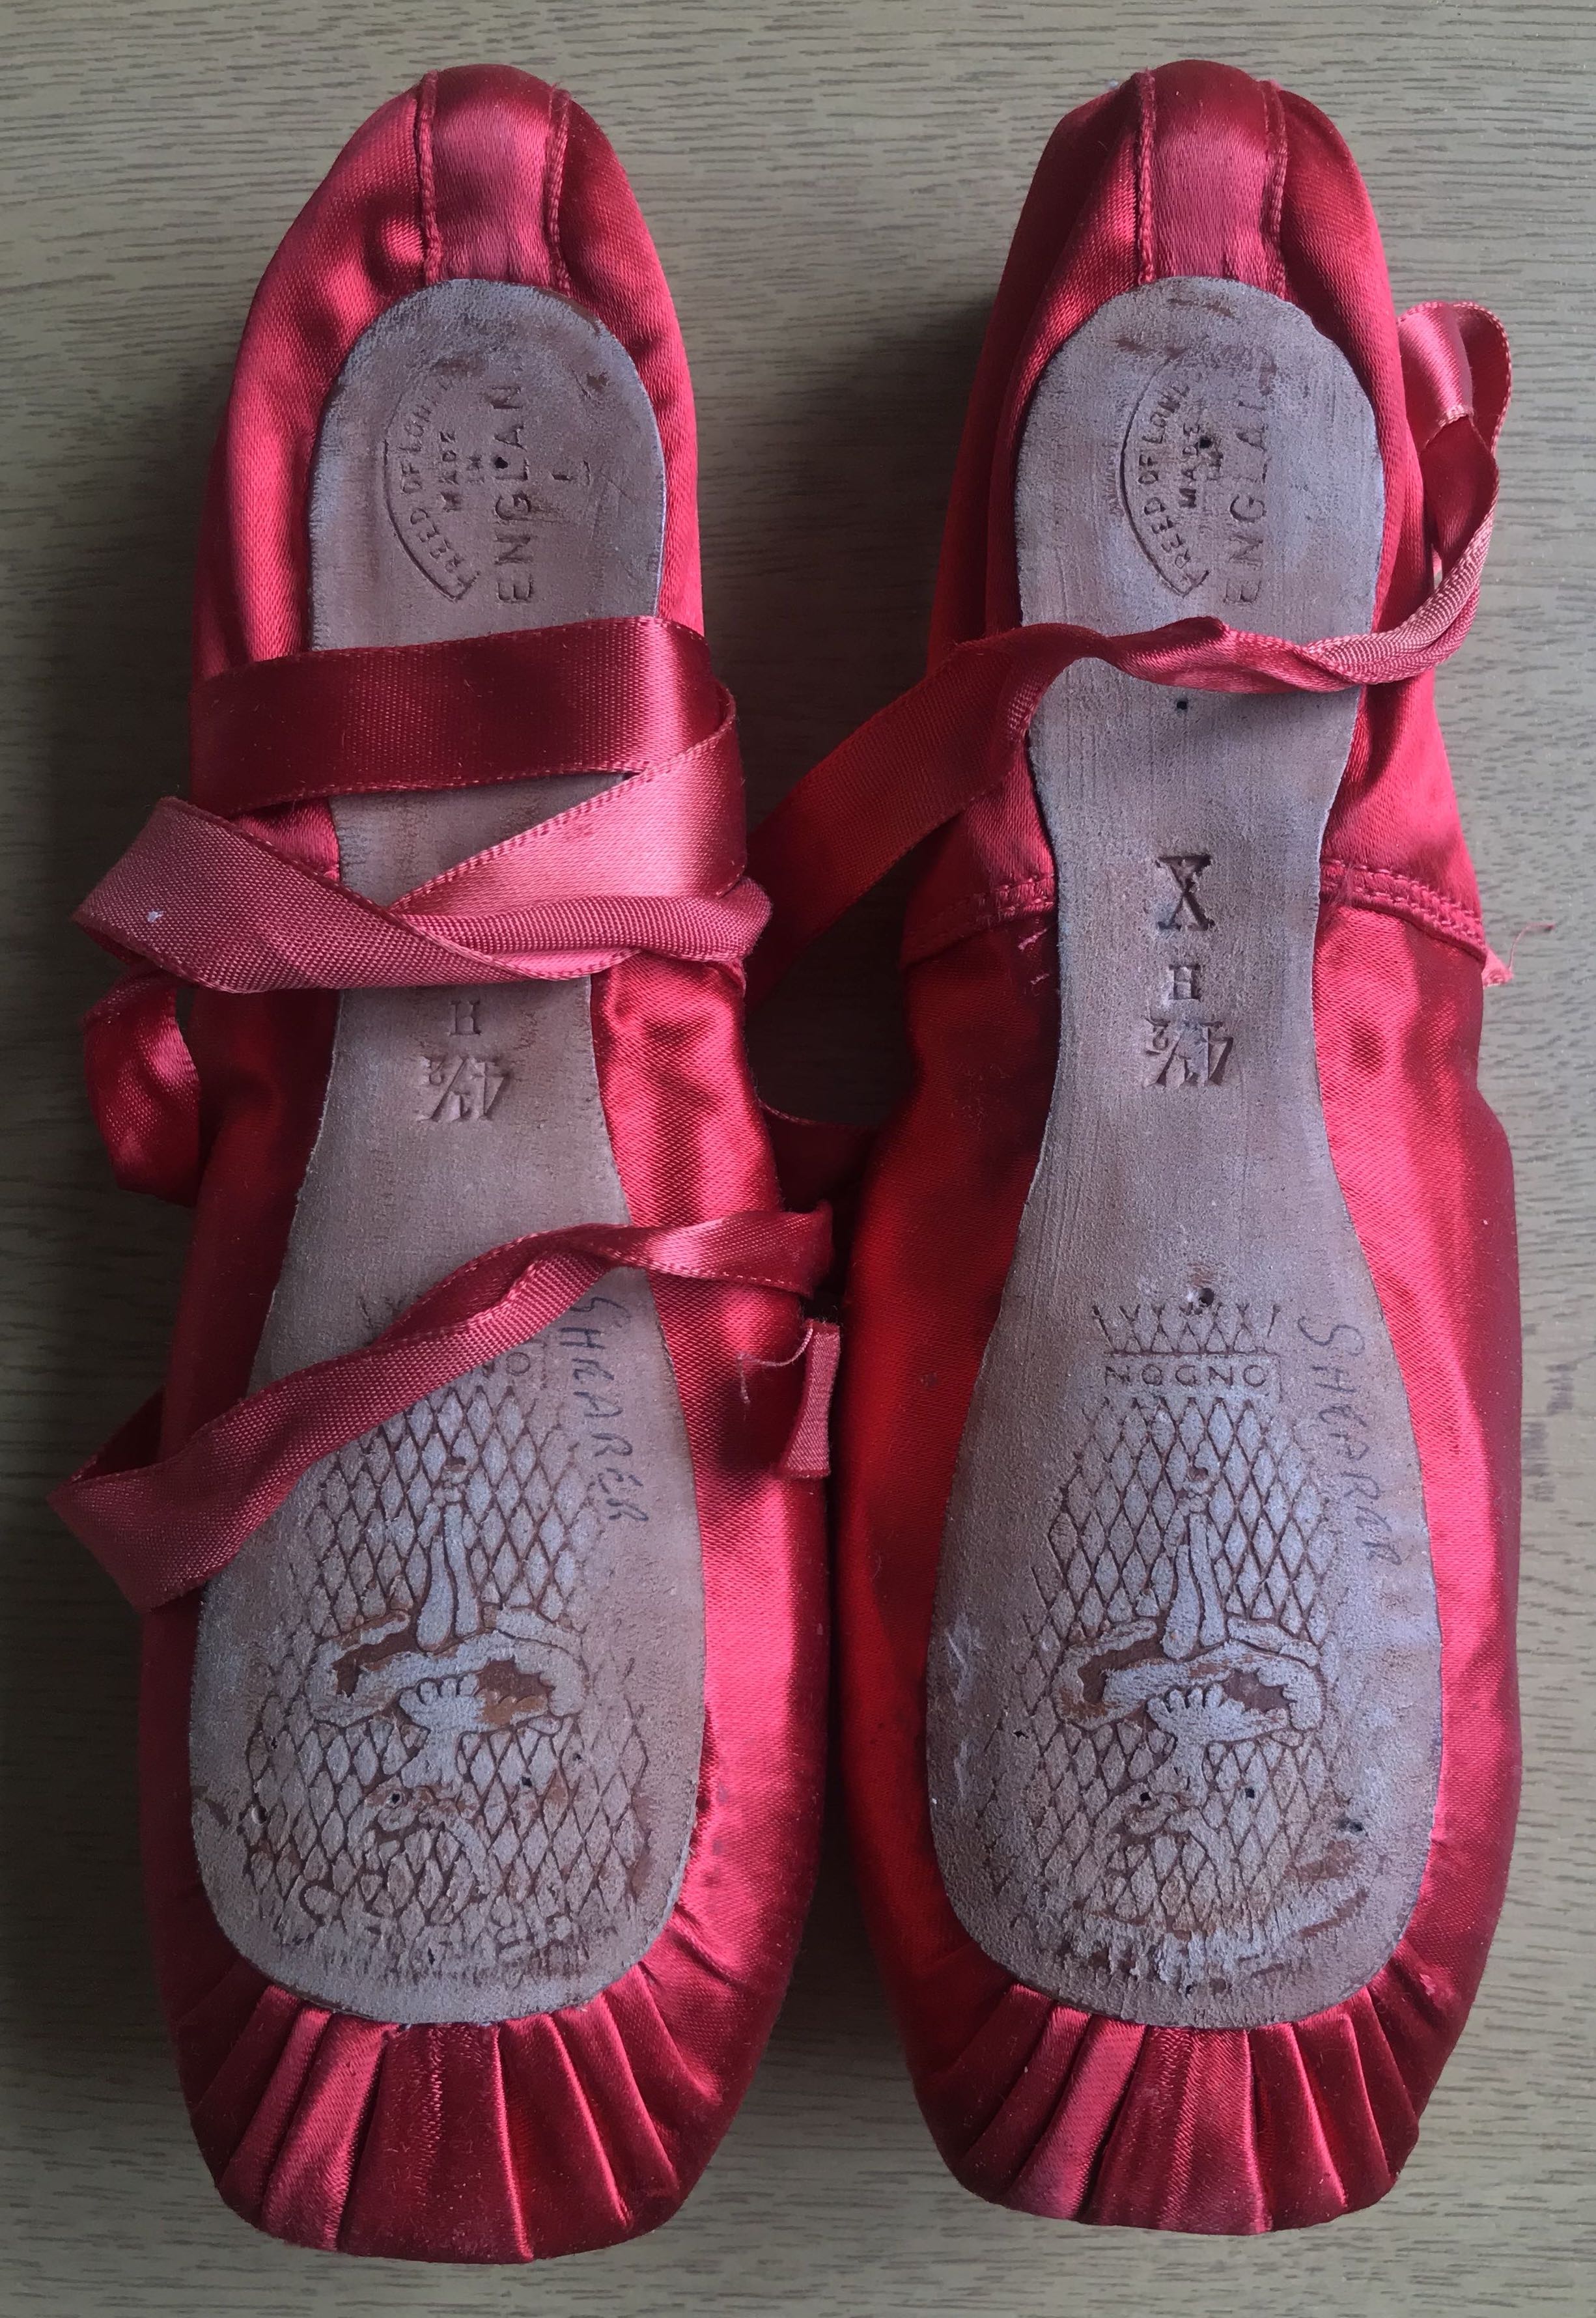 The pointe shoes from 'The Red Shoes' - worn by Moira Shearer